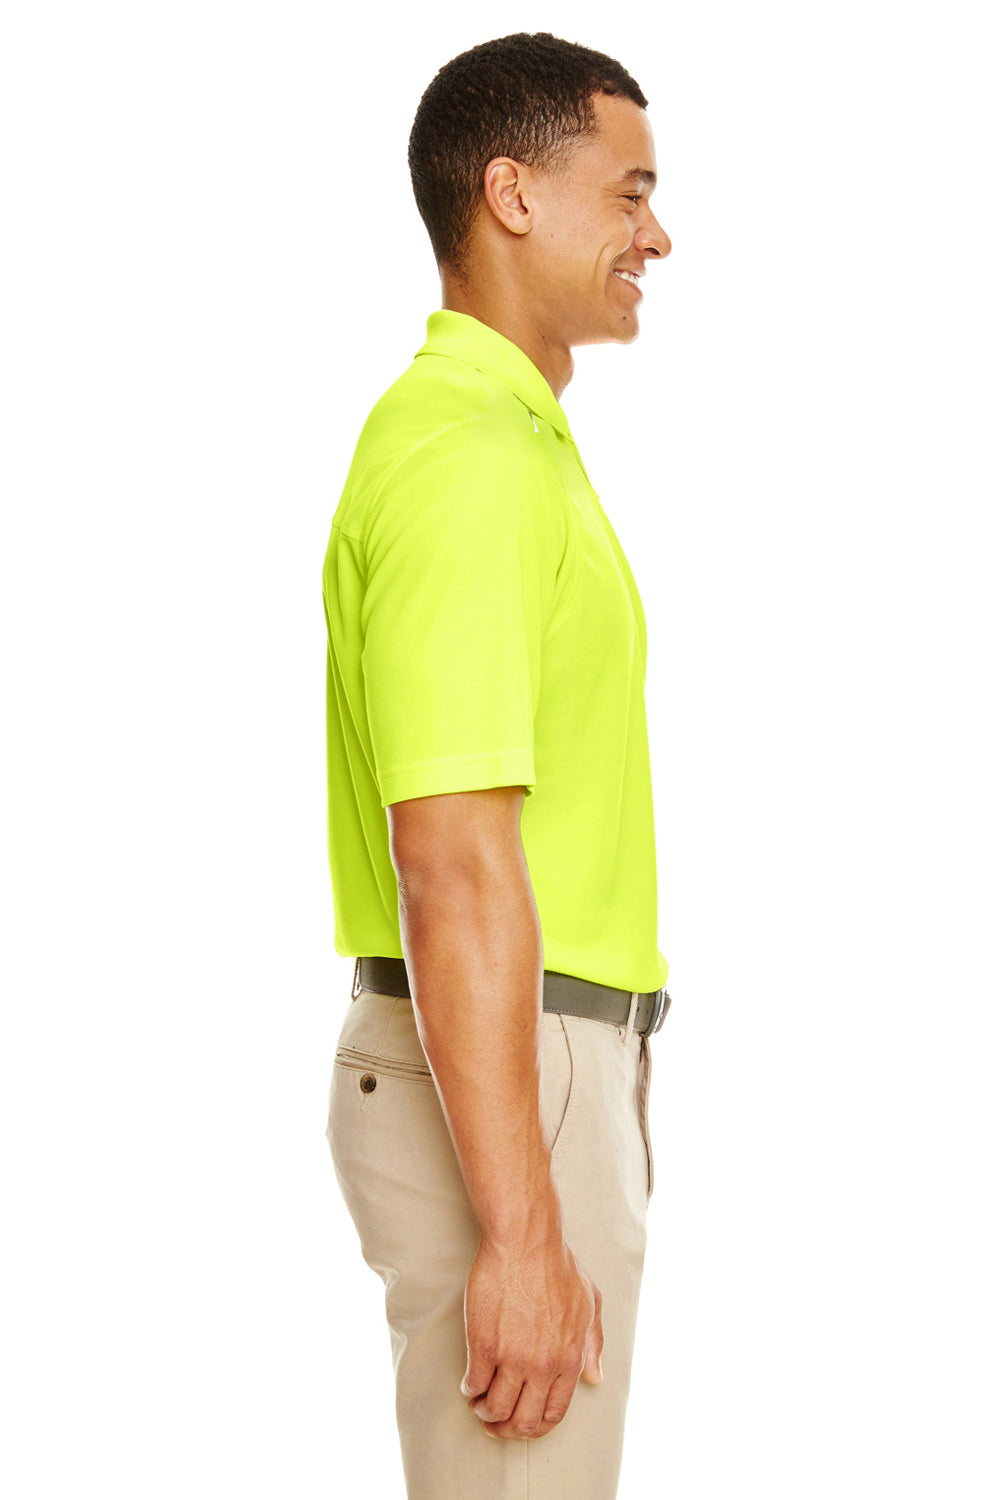 Core 365 88181R Mens Radiant Performance Moisture Wicking Short Sleeve Polo Shirt Safety Yellow Side